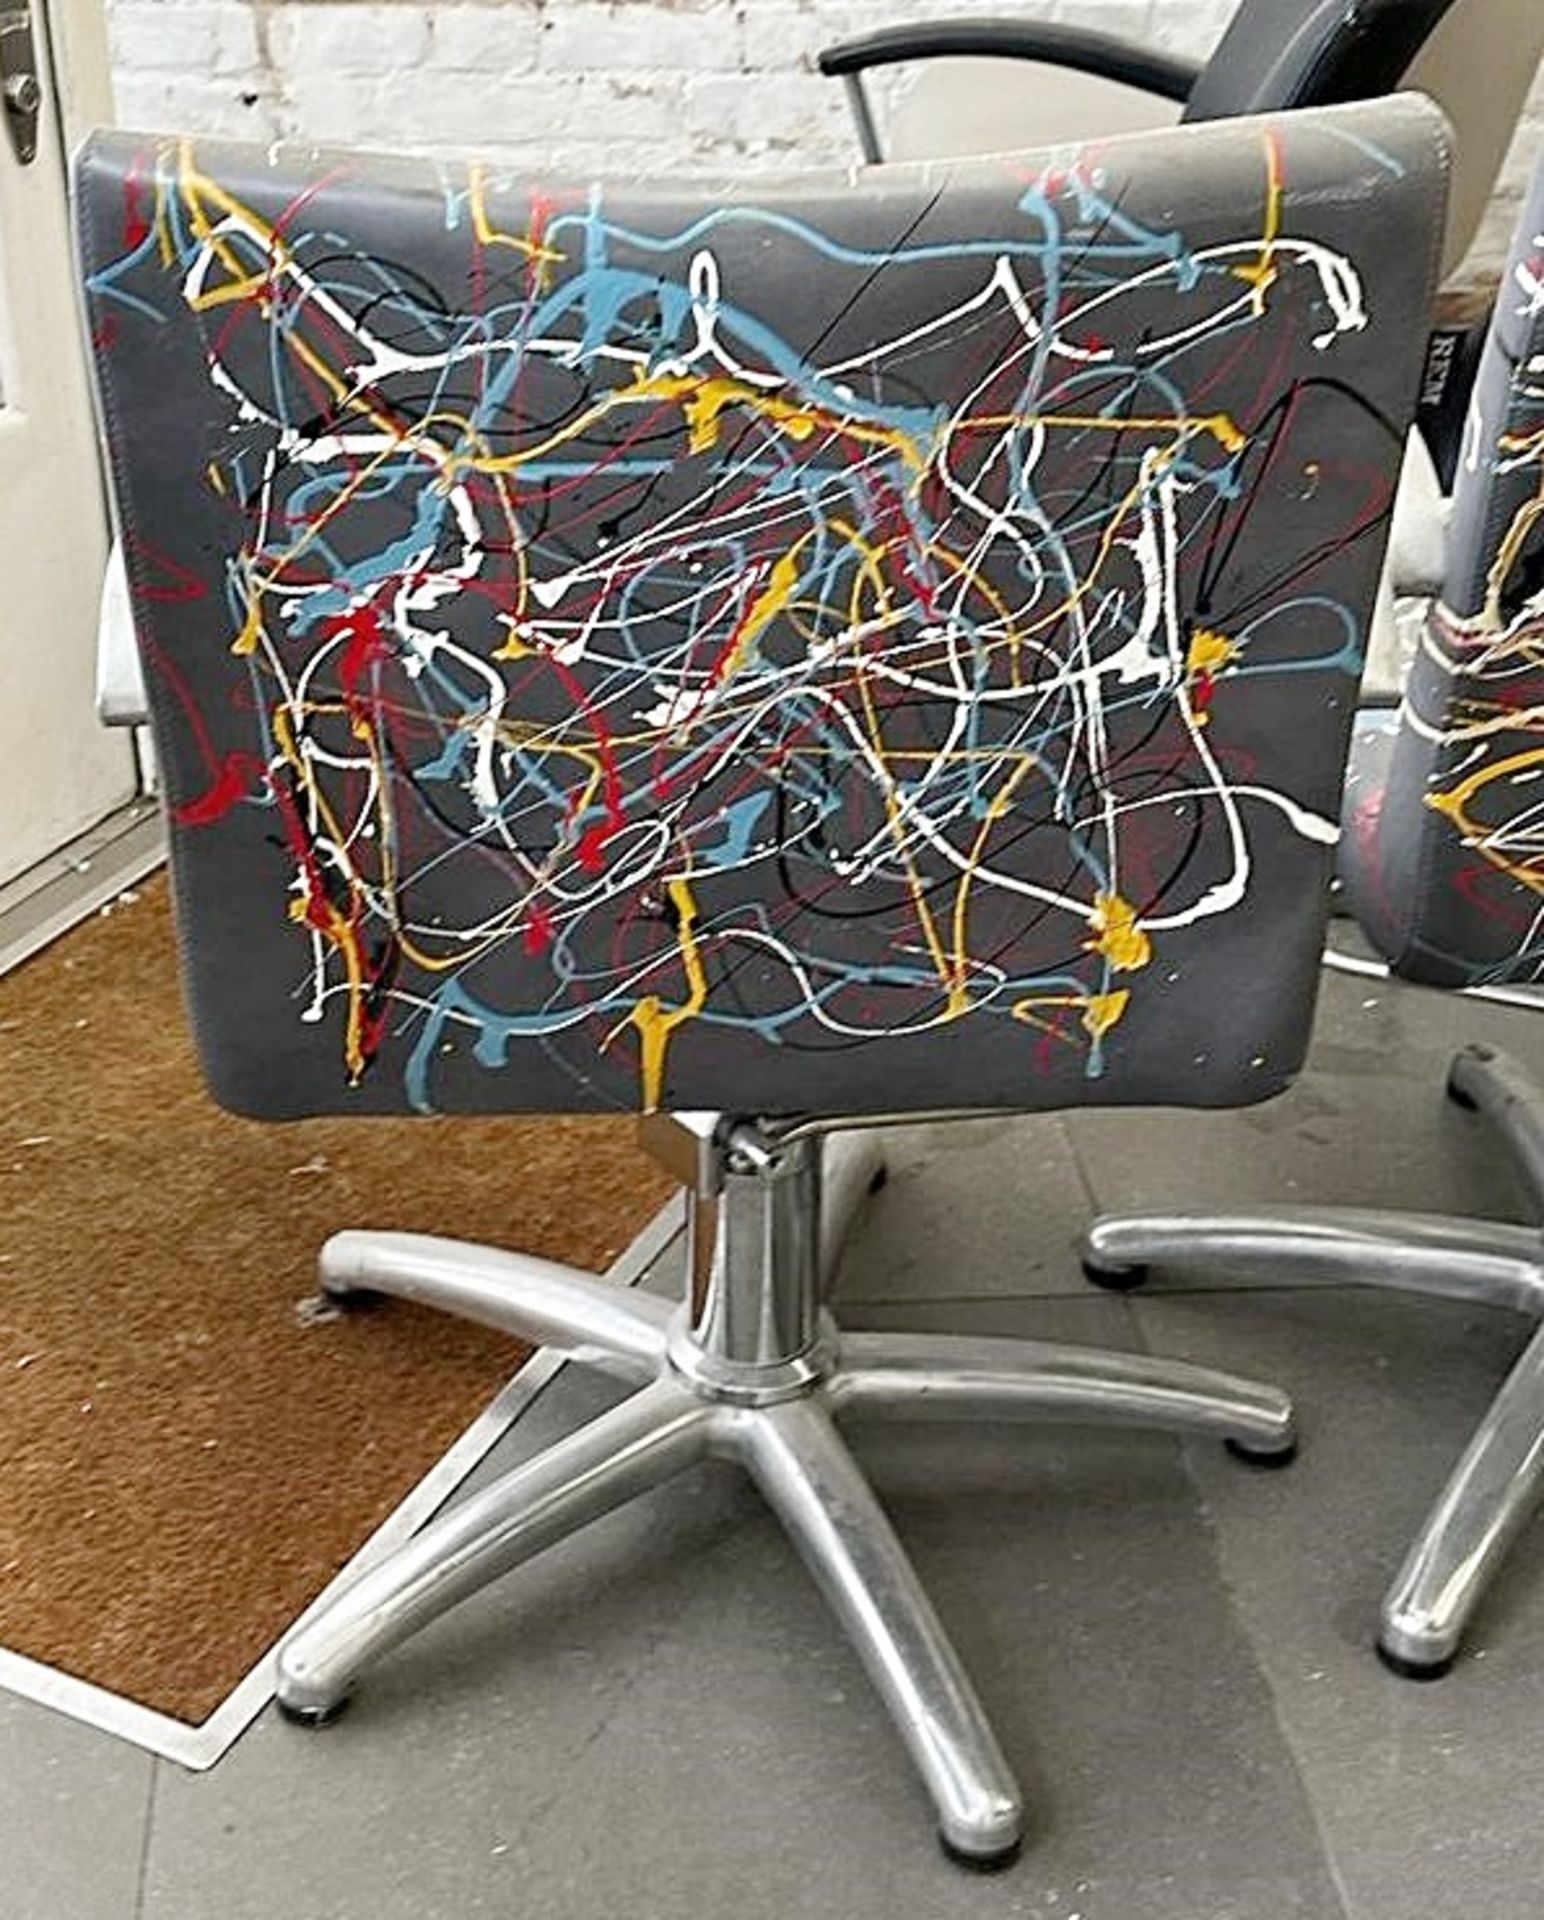 1 x REM Leather Stylist Chair Featuring Especially Commissioned Abstract Paintwork By A Renowned - Image 2 of 6